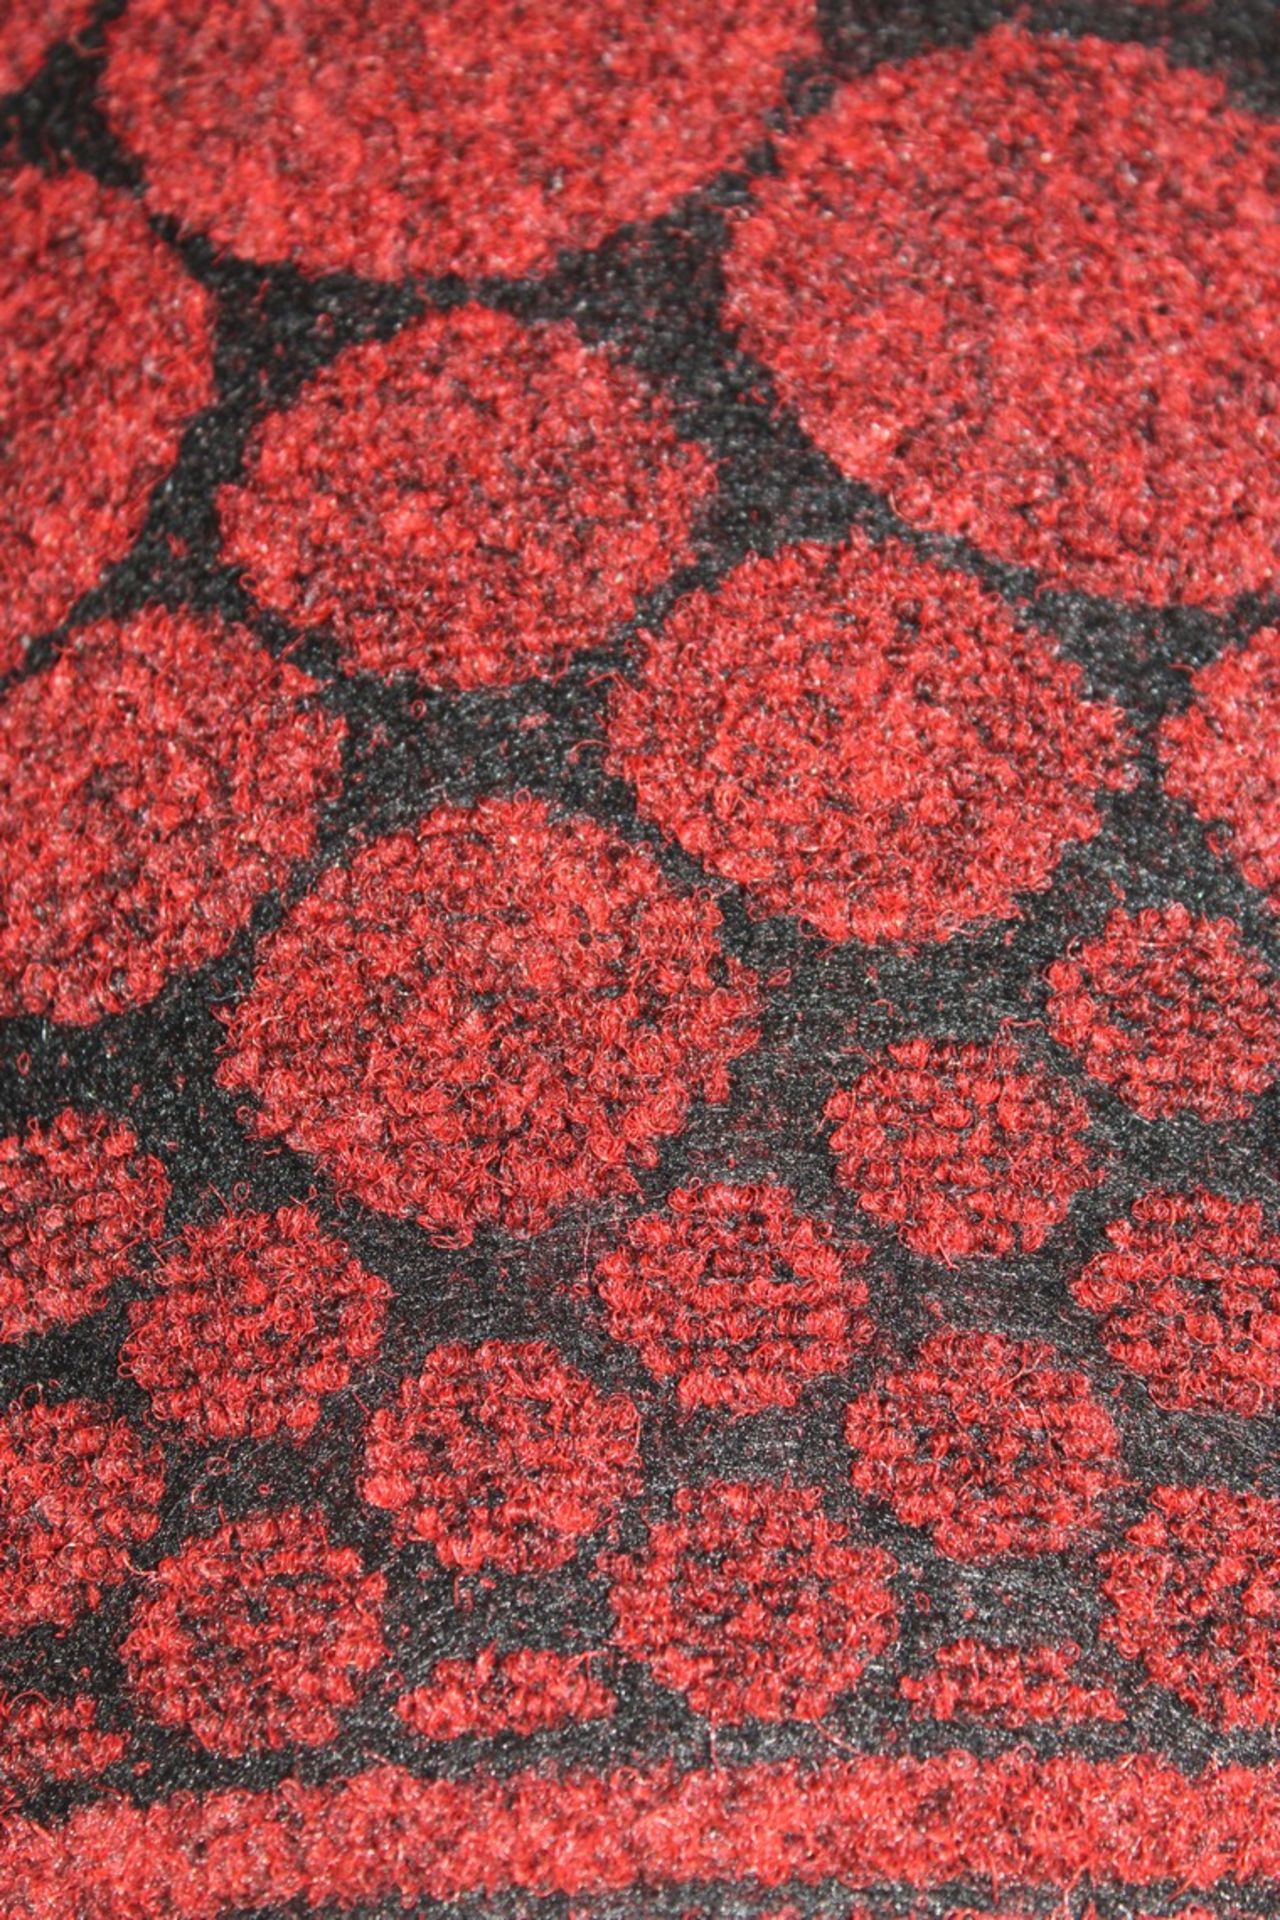 Red And Black Hard Wearing Floor Mat RRP £60 (Pictures Are For Illustration Purposes Only) (